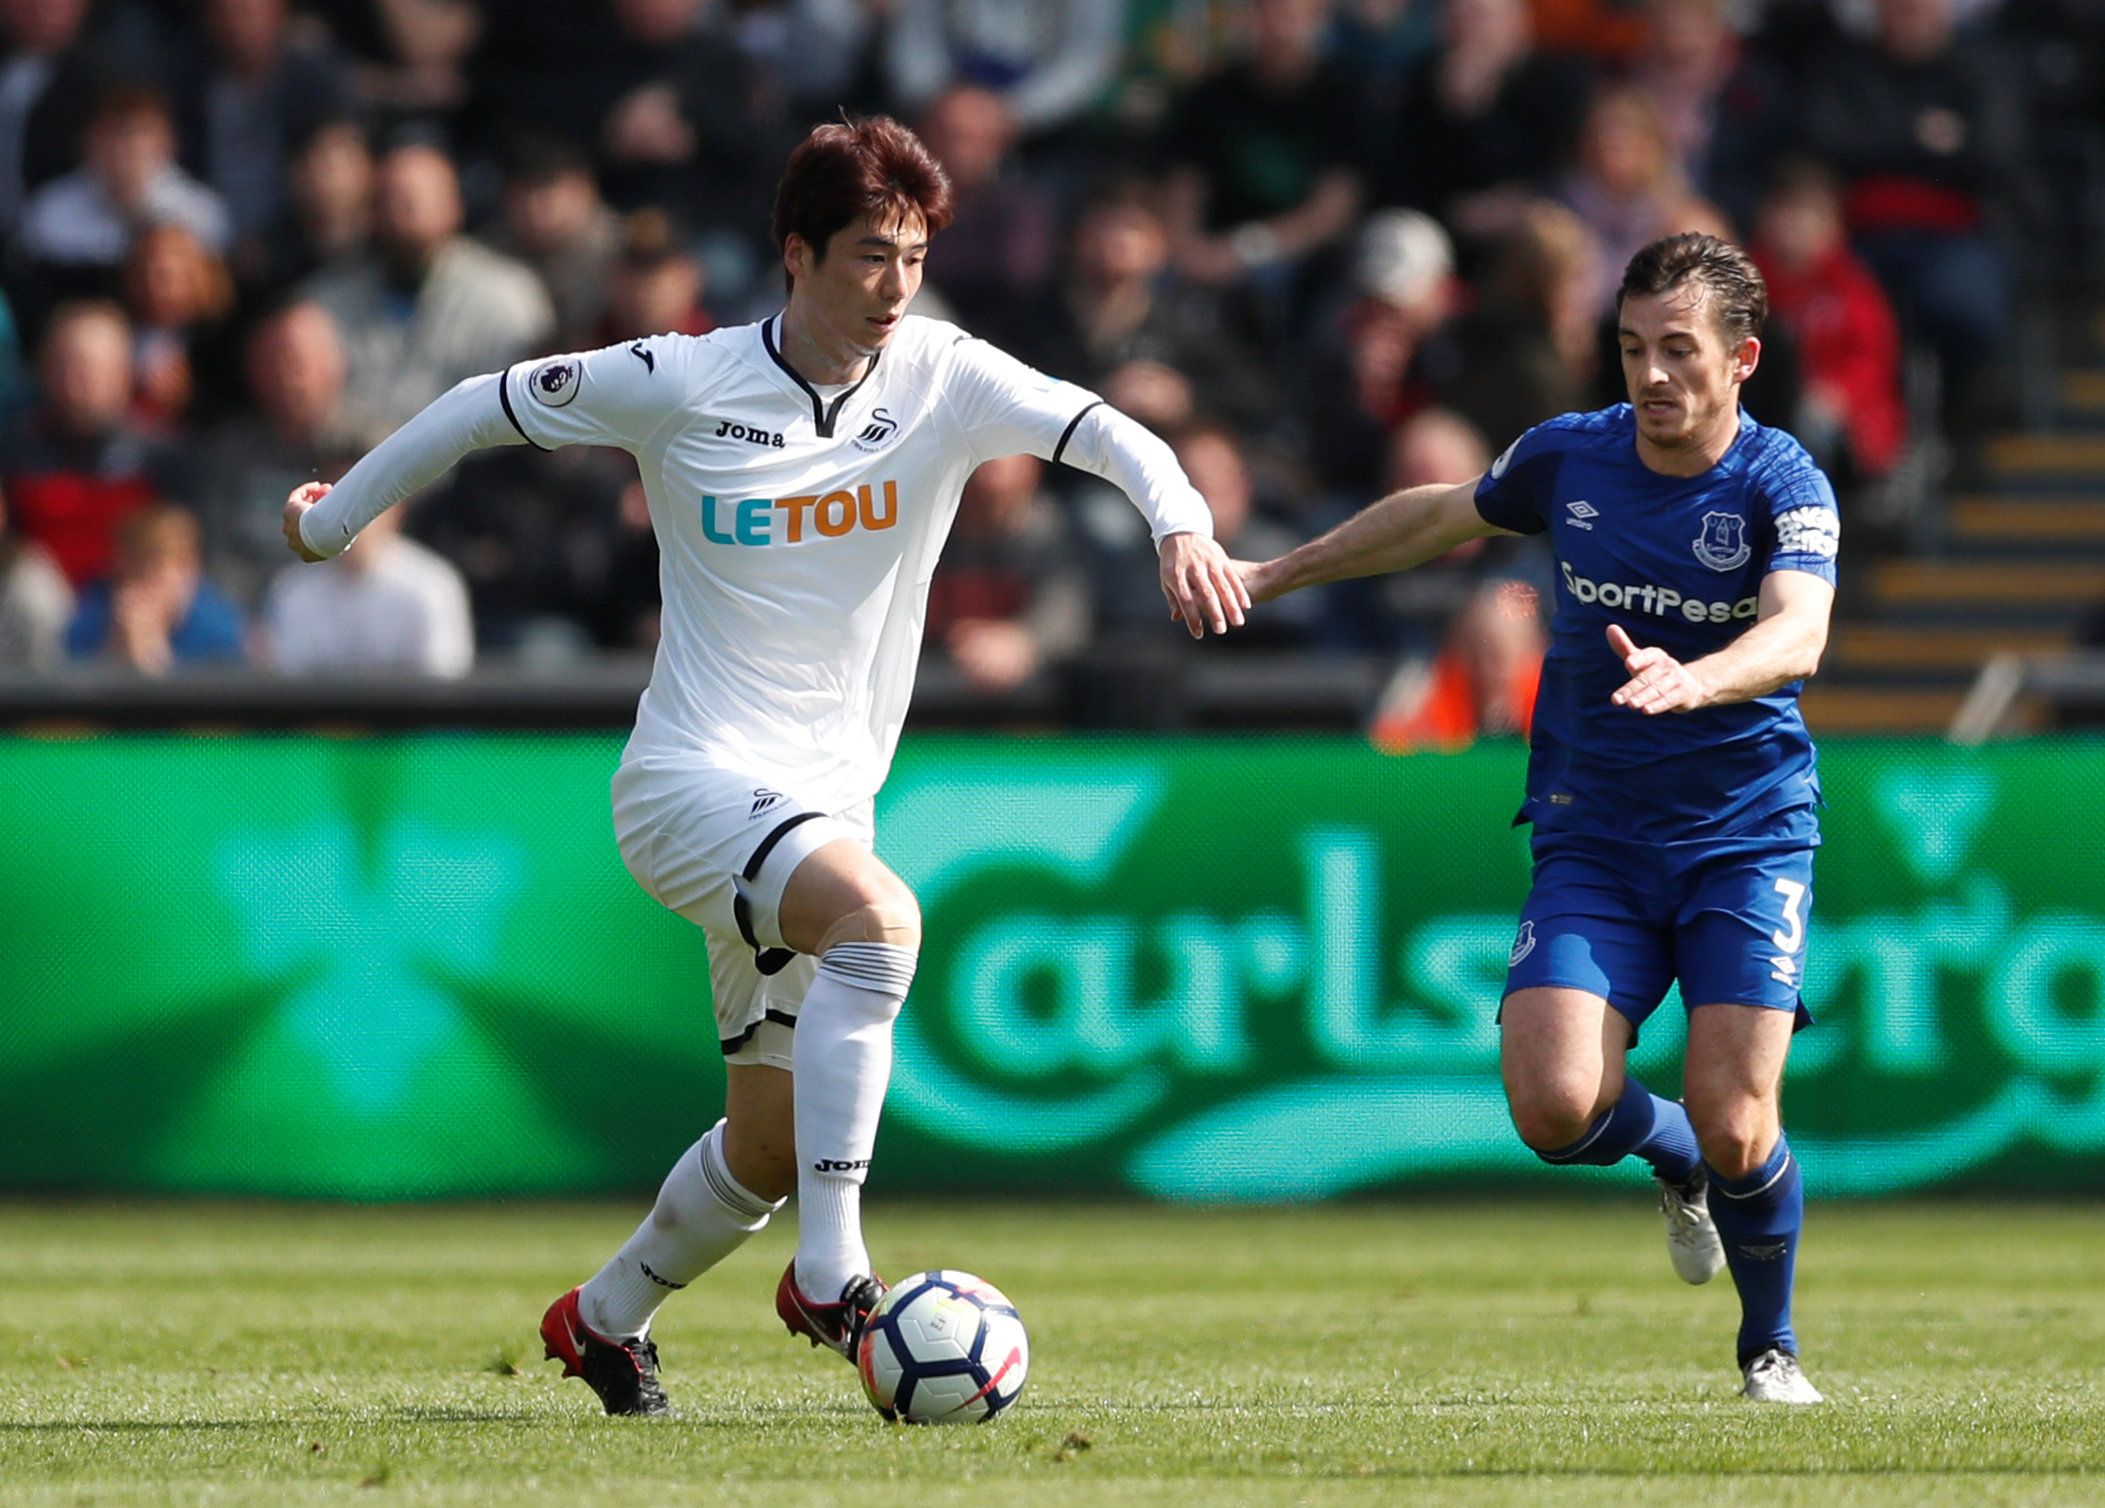 Soccer Football - Premier League - Swansea City vs Everton - Liberty Stadium, Swansea, Britain - April 14, 2018   Swansea City's Ki Sung Yueng in action with Everton's Leighton Baines    Action Images via Reuters/Andrew Boyers    EDITORIAL USE ONLY. No use with unauthorized audio, video, data, fixture lists, club/league logos or 